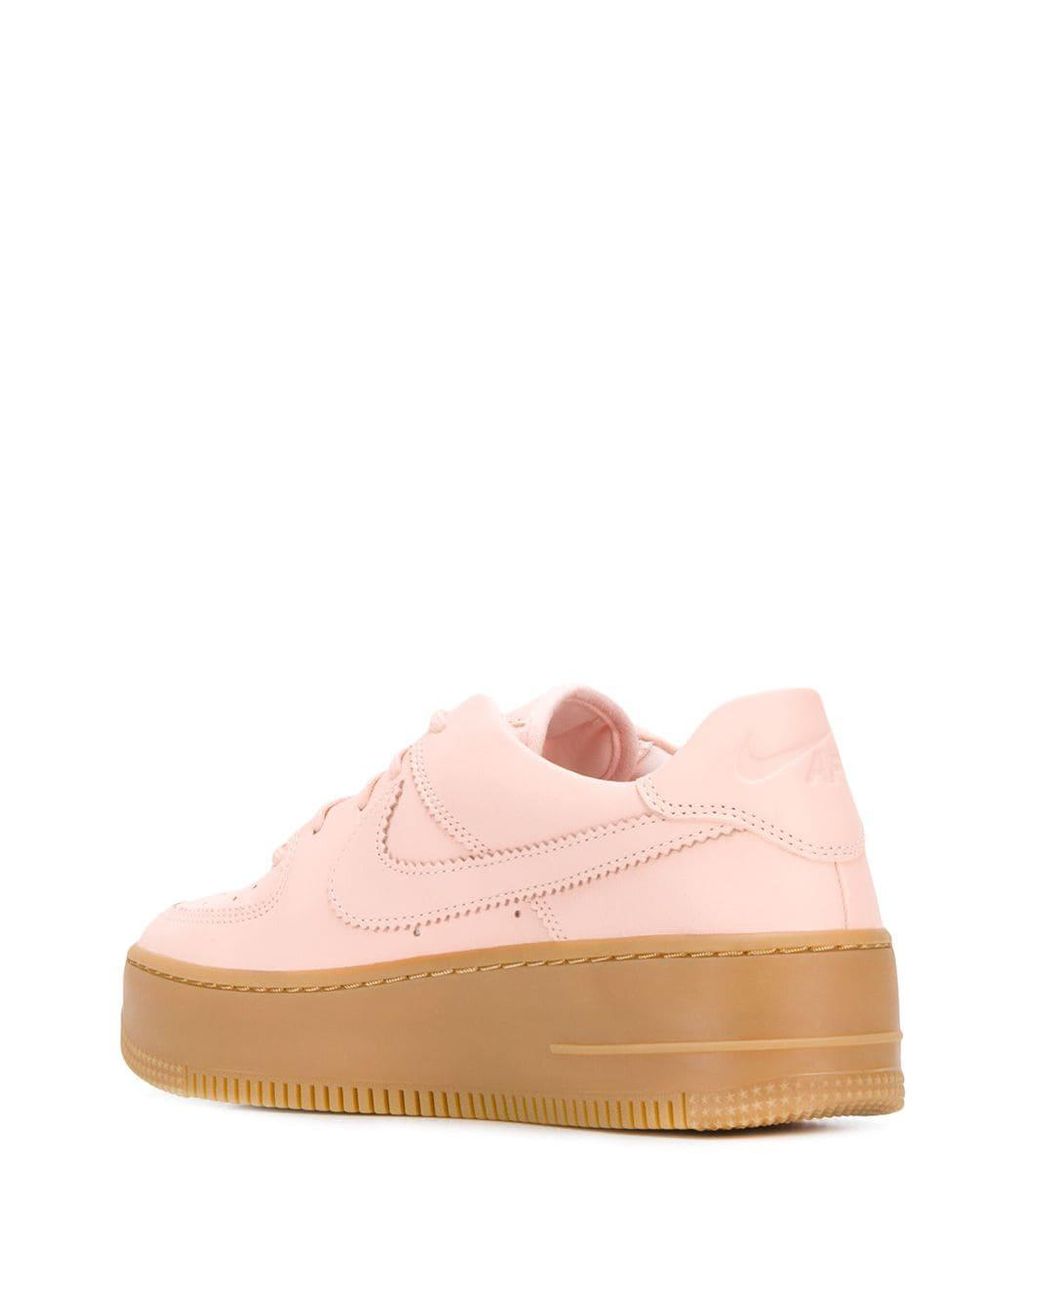 Nike Leather Air Force 1 Sage Low Lx Sneakers in Pink | Lyst